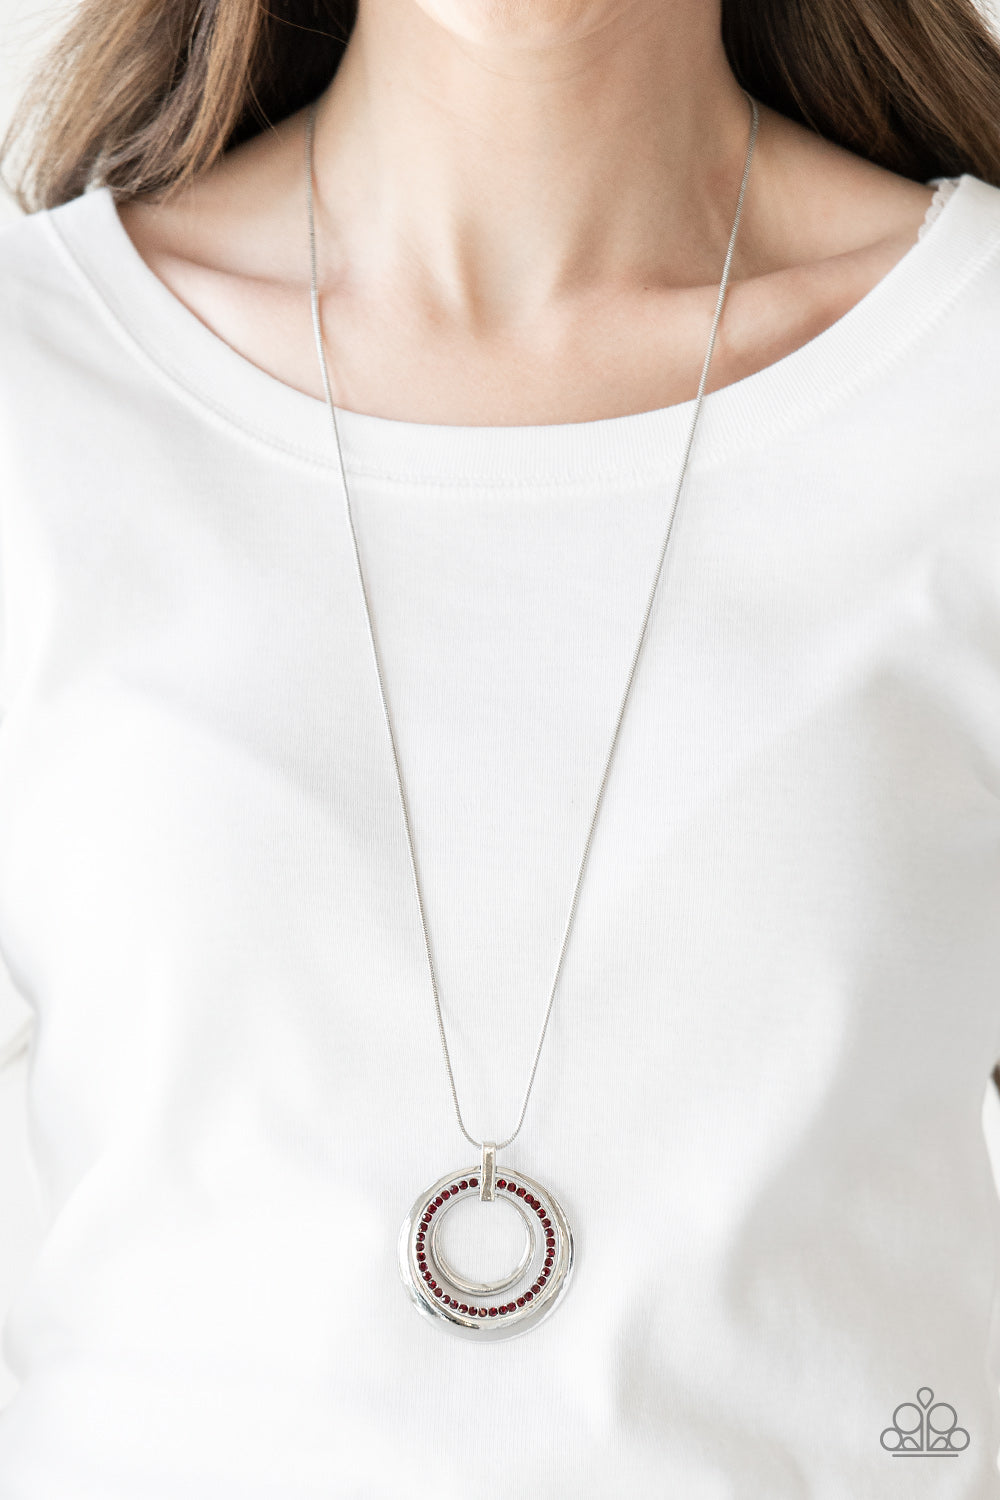 Gather Around Gorgeous Necklace (Red, Pink, White)